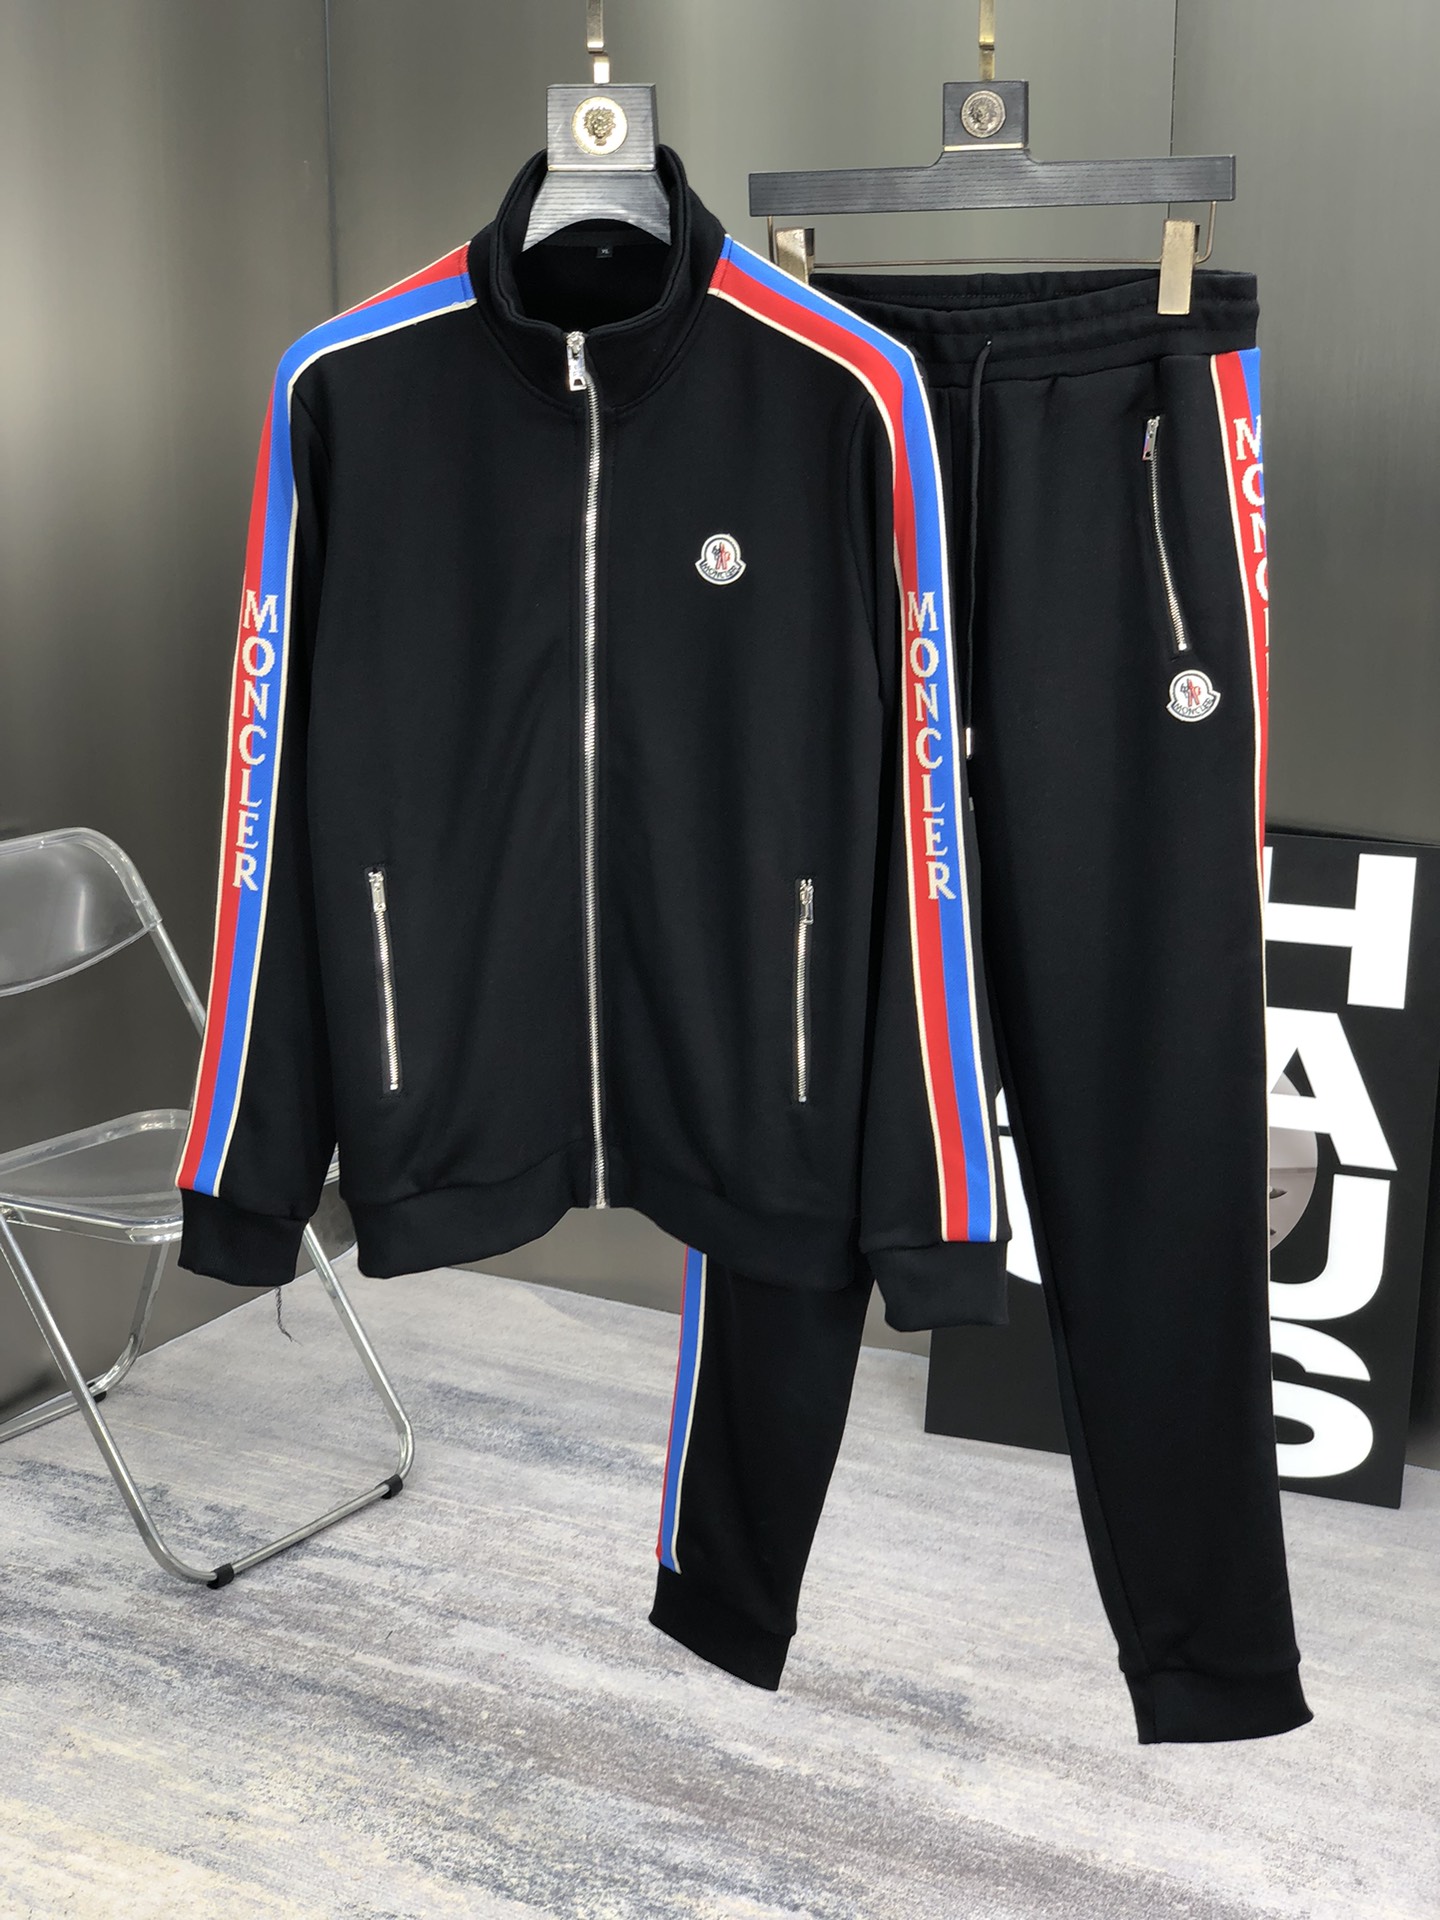 1:1
 Moncler Clothing Two Piece Outfits & Matching Sets Fall/Winter Collection Fashion Hooded Top